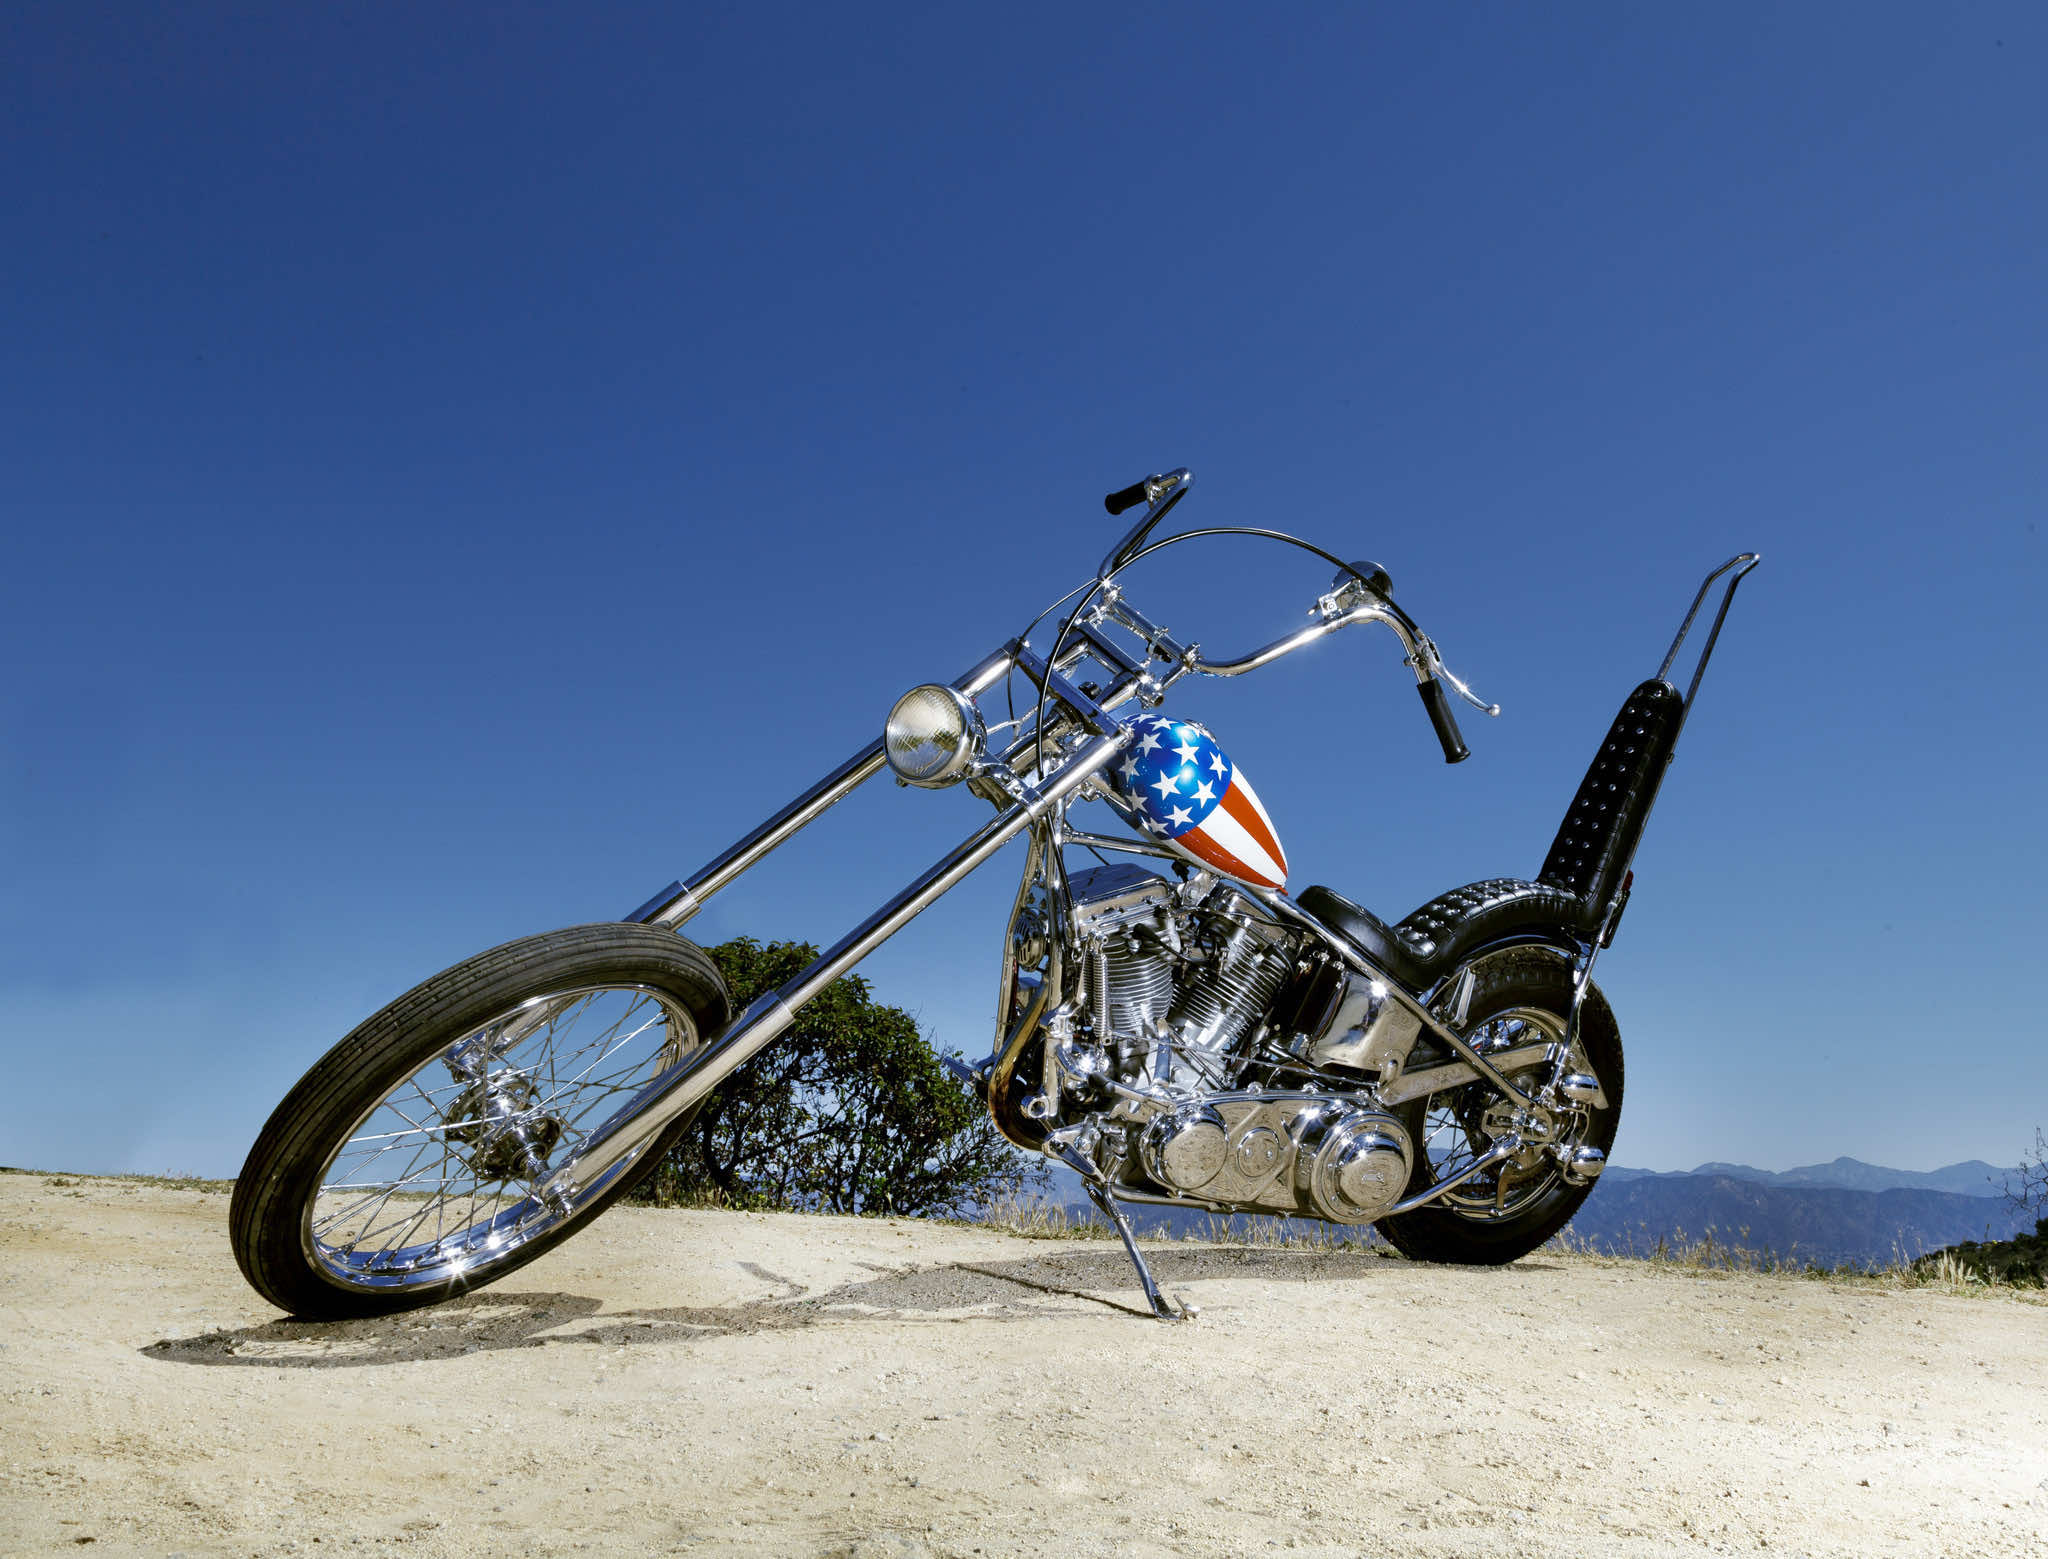 Captain America Chopper from Easy Rider is the Most Expensive Bike3